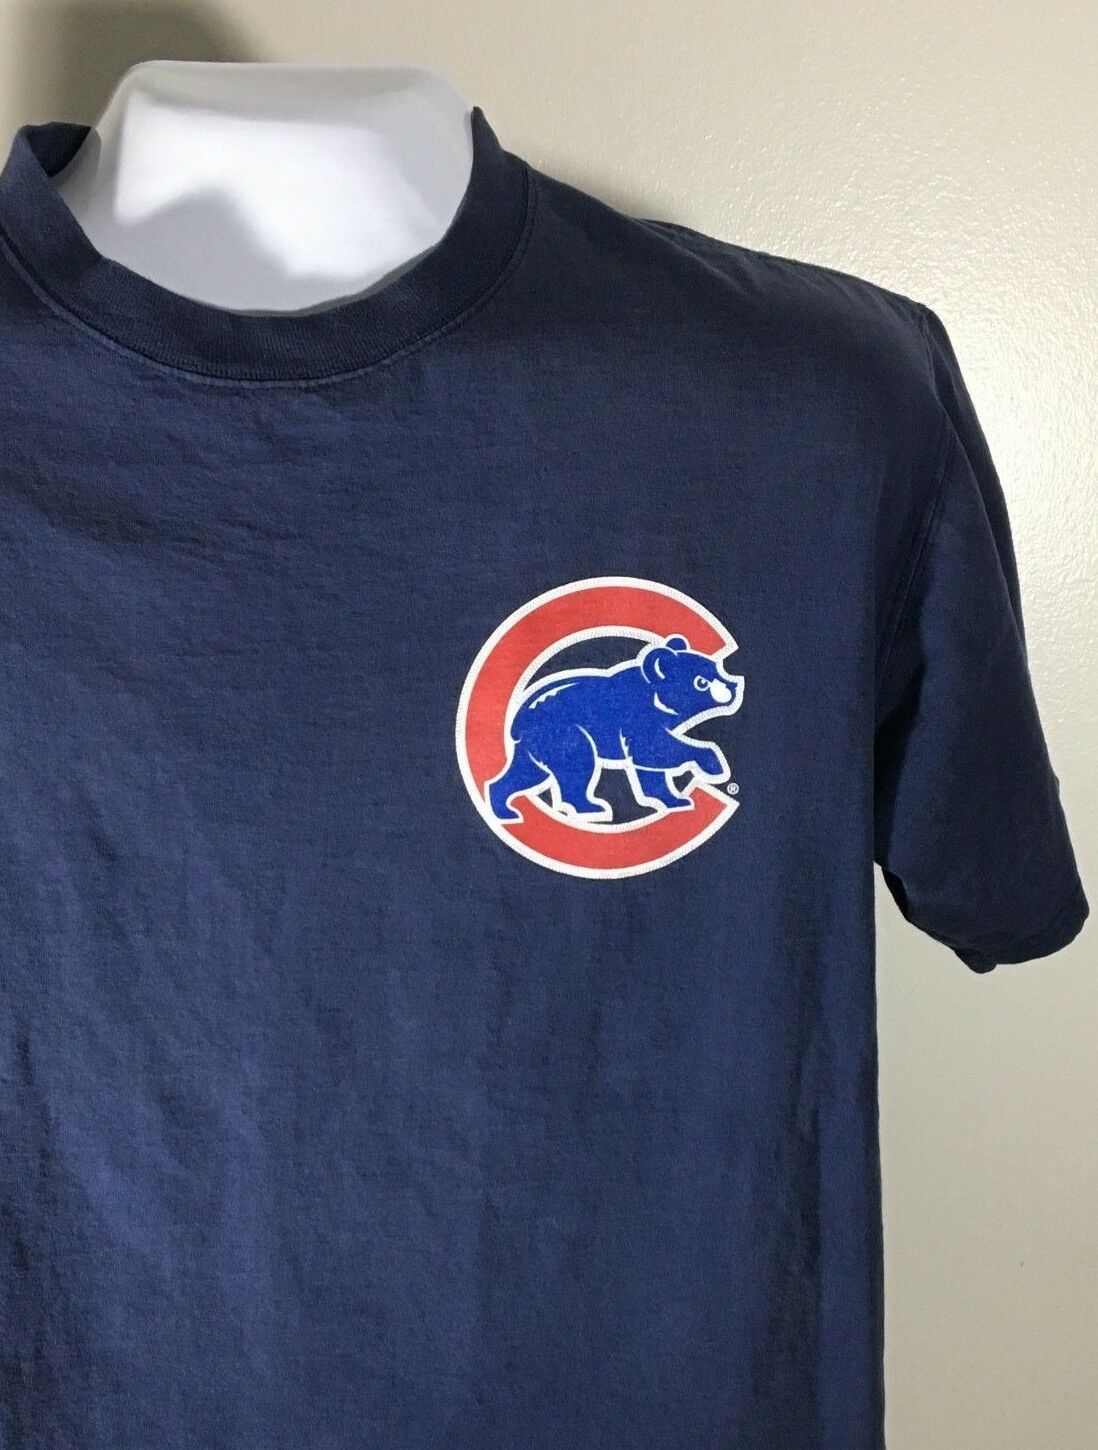 Chicago Cubs Baseball Men's T Shirt Size L and similar items